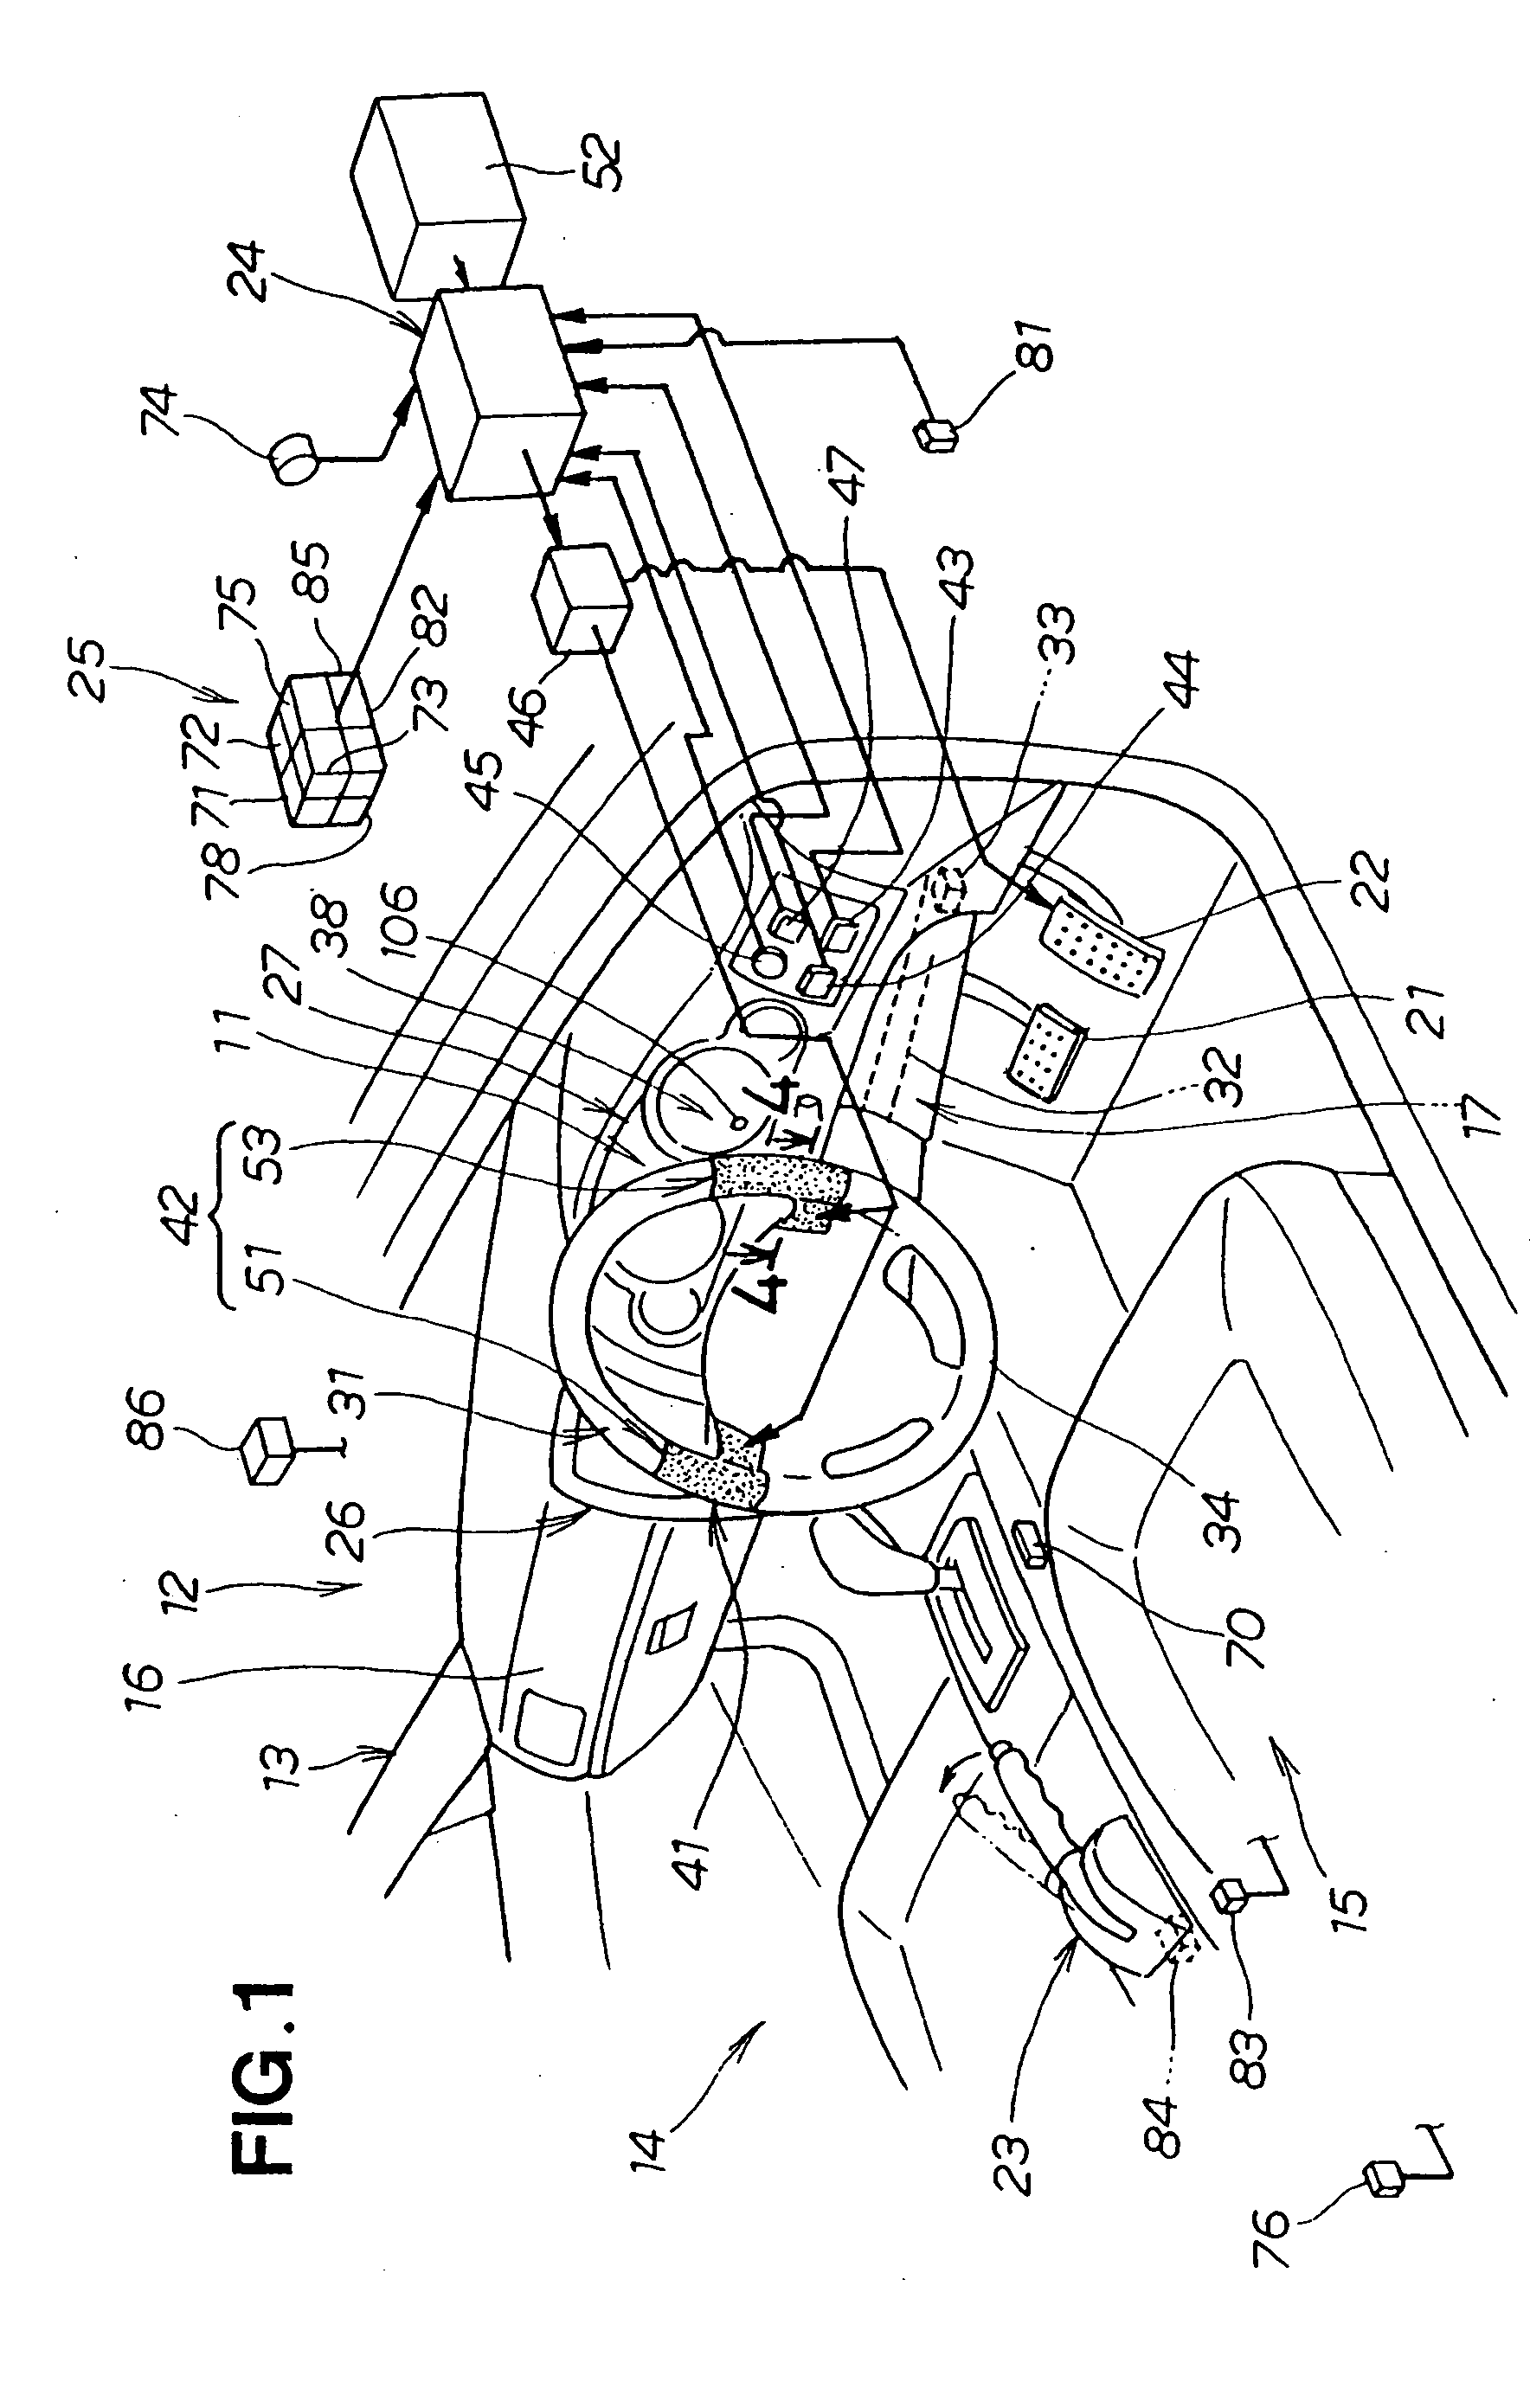 Vehicle state information transmission apparatus using tactile device